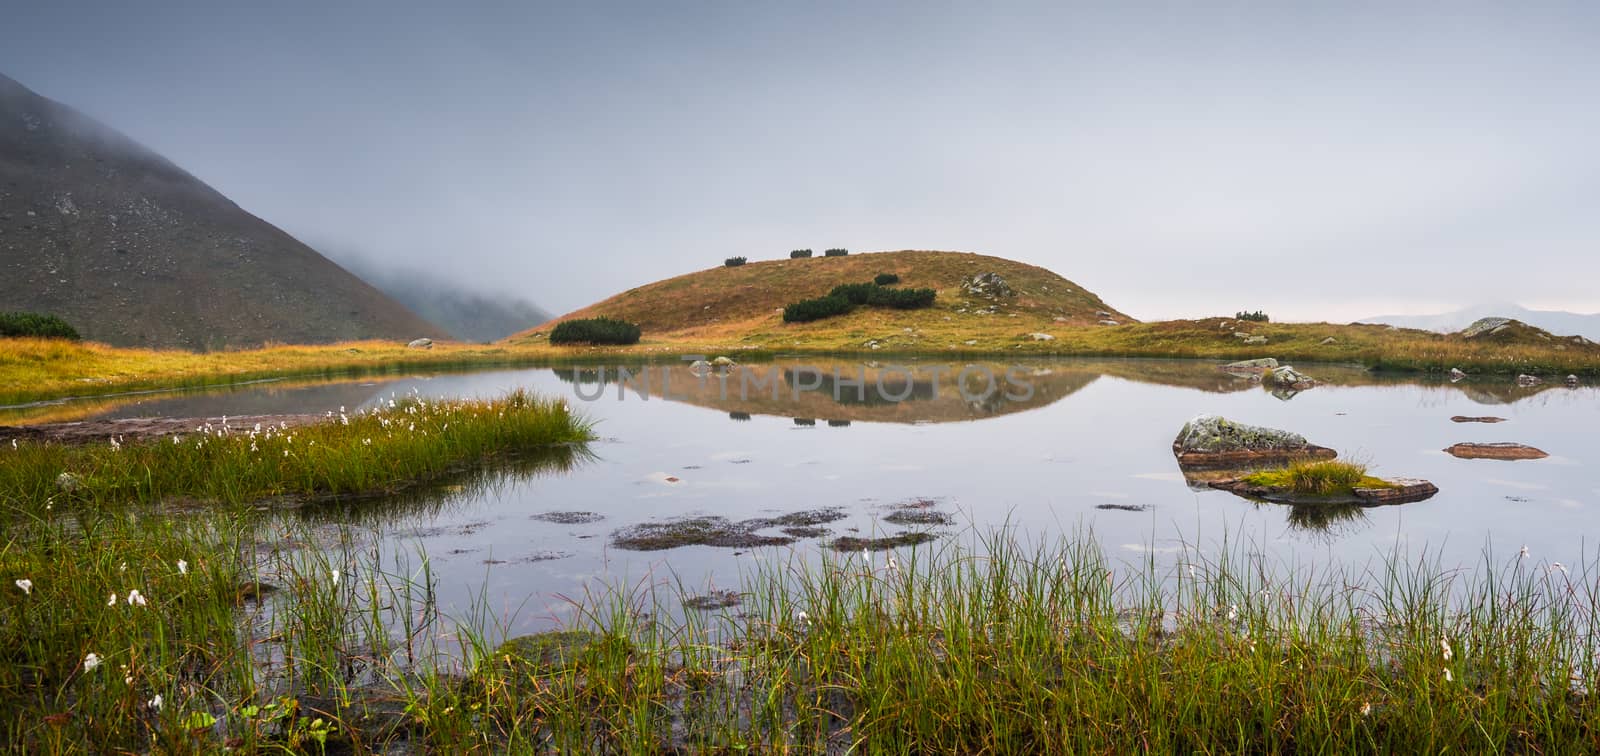 Small Tarn with Rocks in Foggy West Tatra Mountains